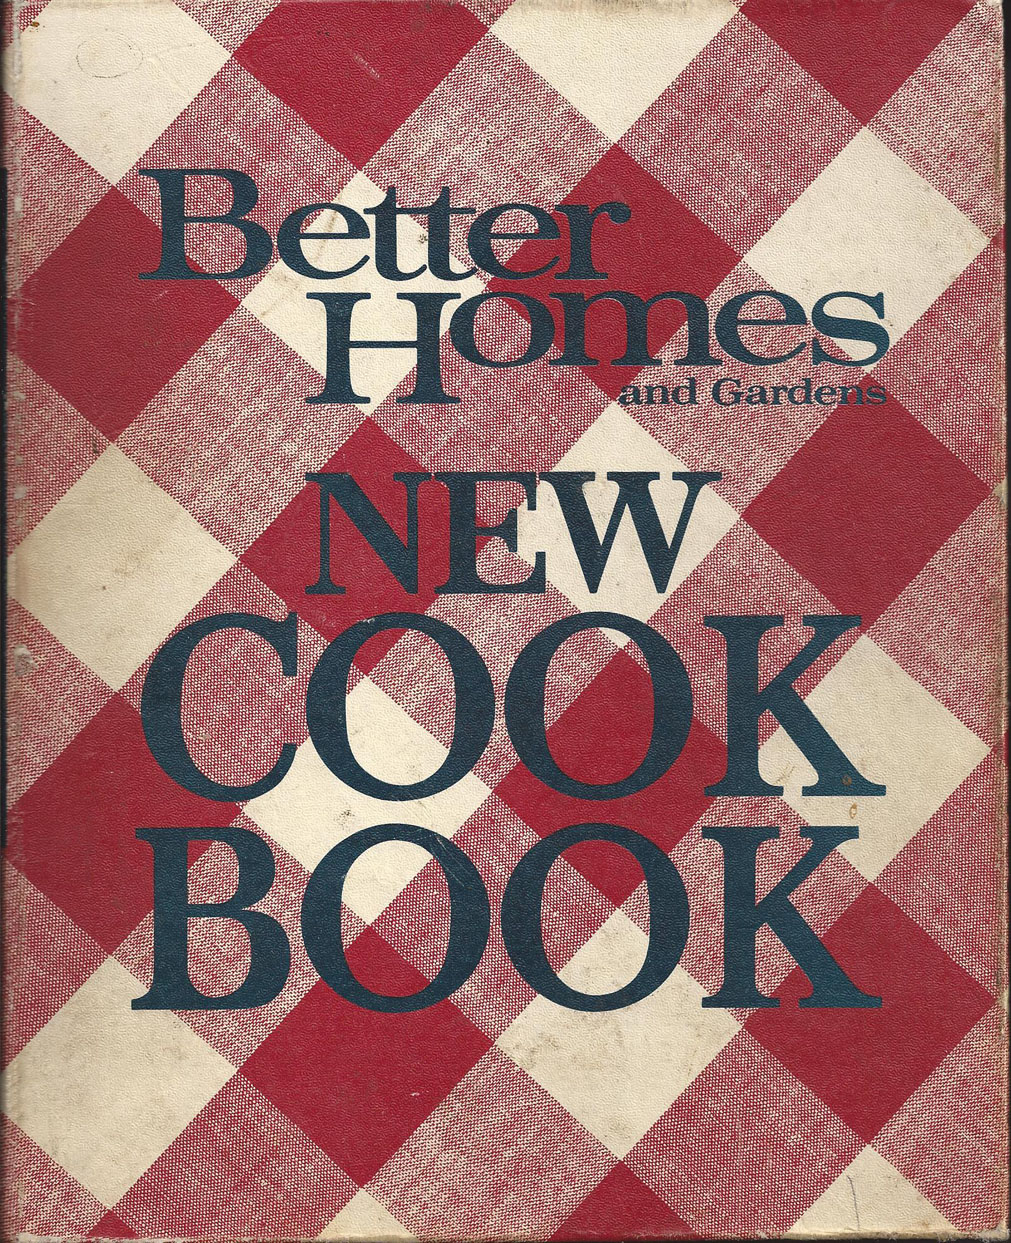 The Iowa Housewife: Better Homes and Gardens 1960's cookbooks